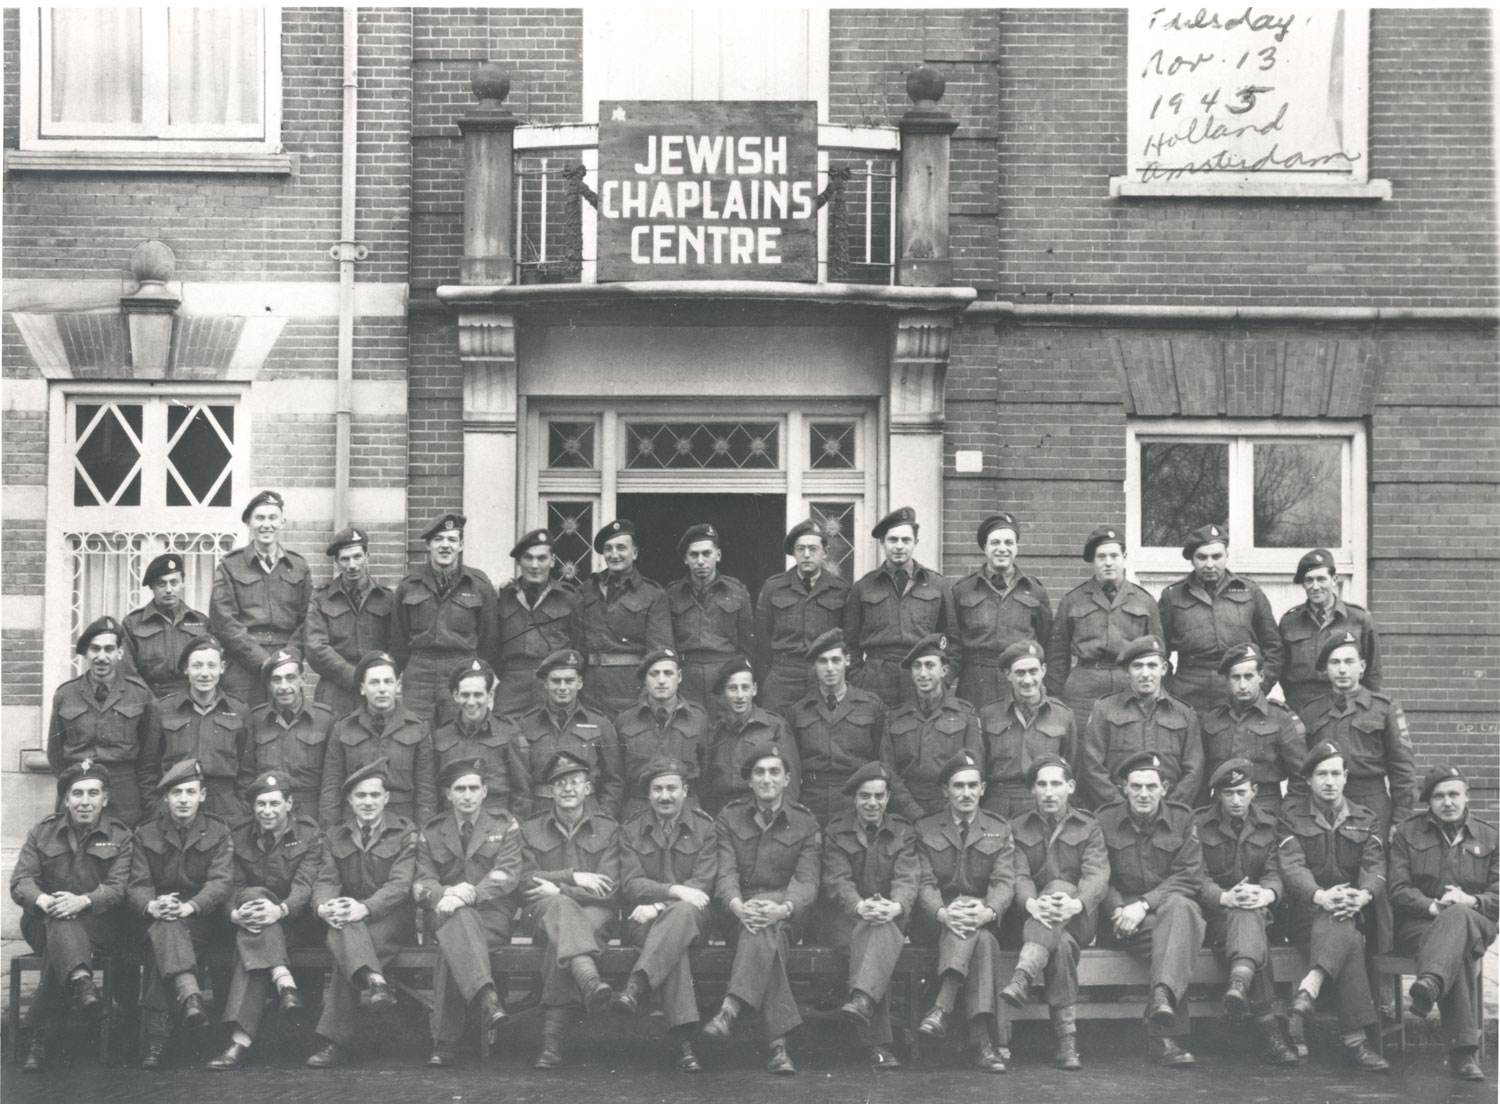 Troops outside the Jewish Chaplains Centre in Amsterdam